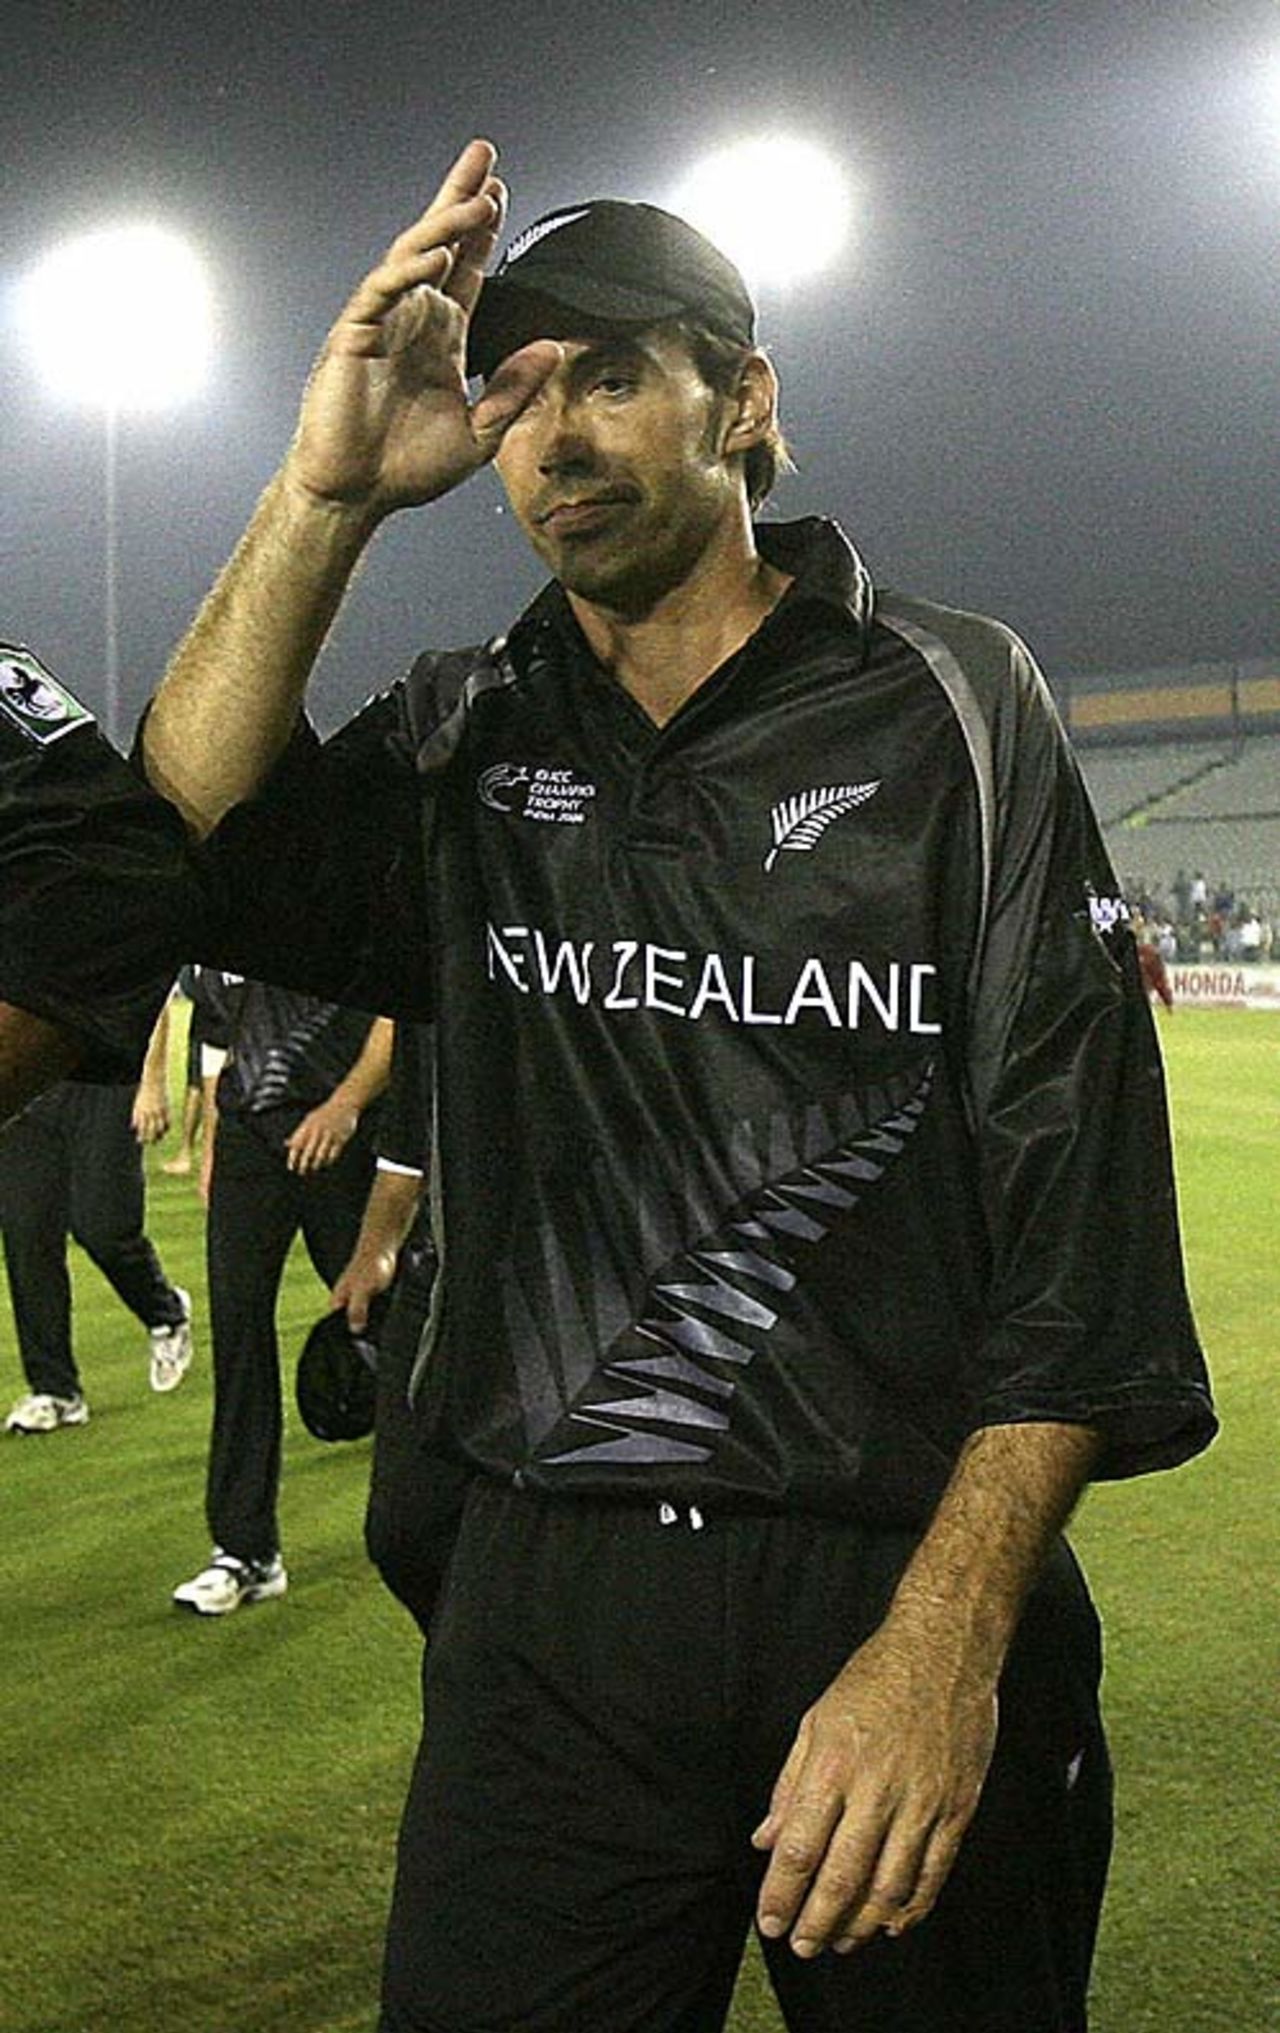 Stephen Fleming waves to the cameras after sealing victory for New Zealand, 8th match, Mohali, Champions Trophy, October 25, 2006